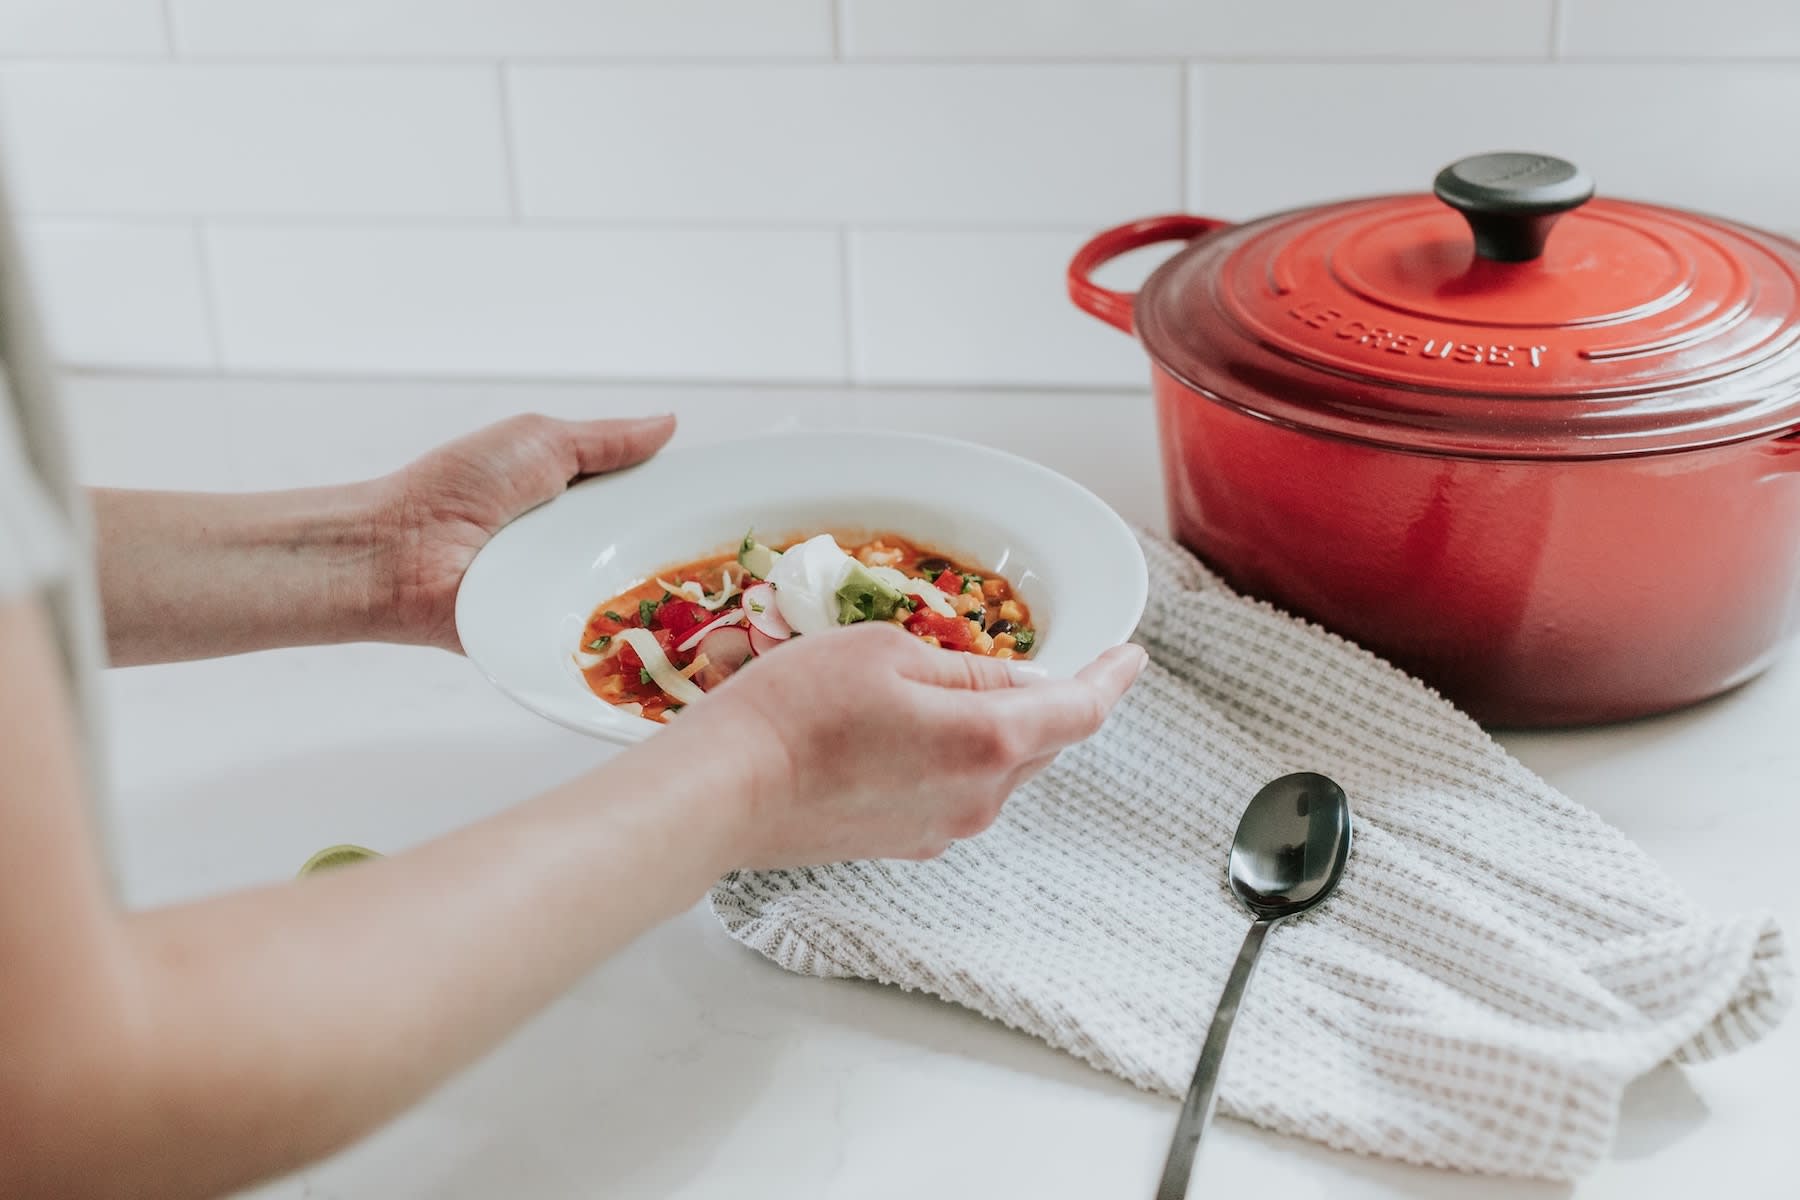 Le Creuset vs. Lodge: The only Dutch oven you need in your kitchen